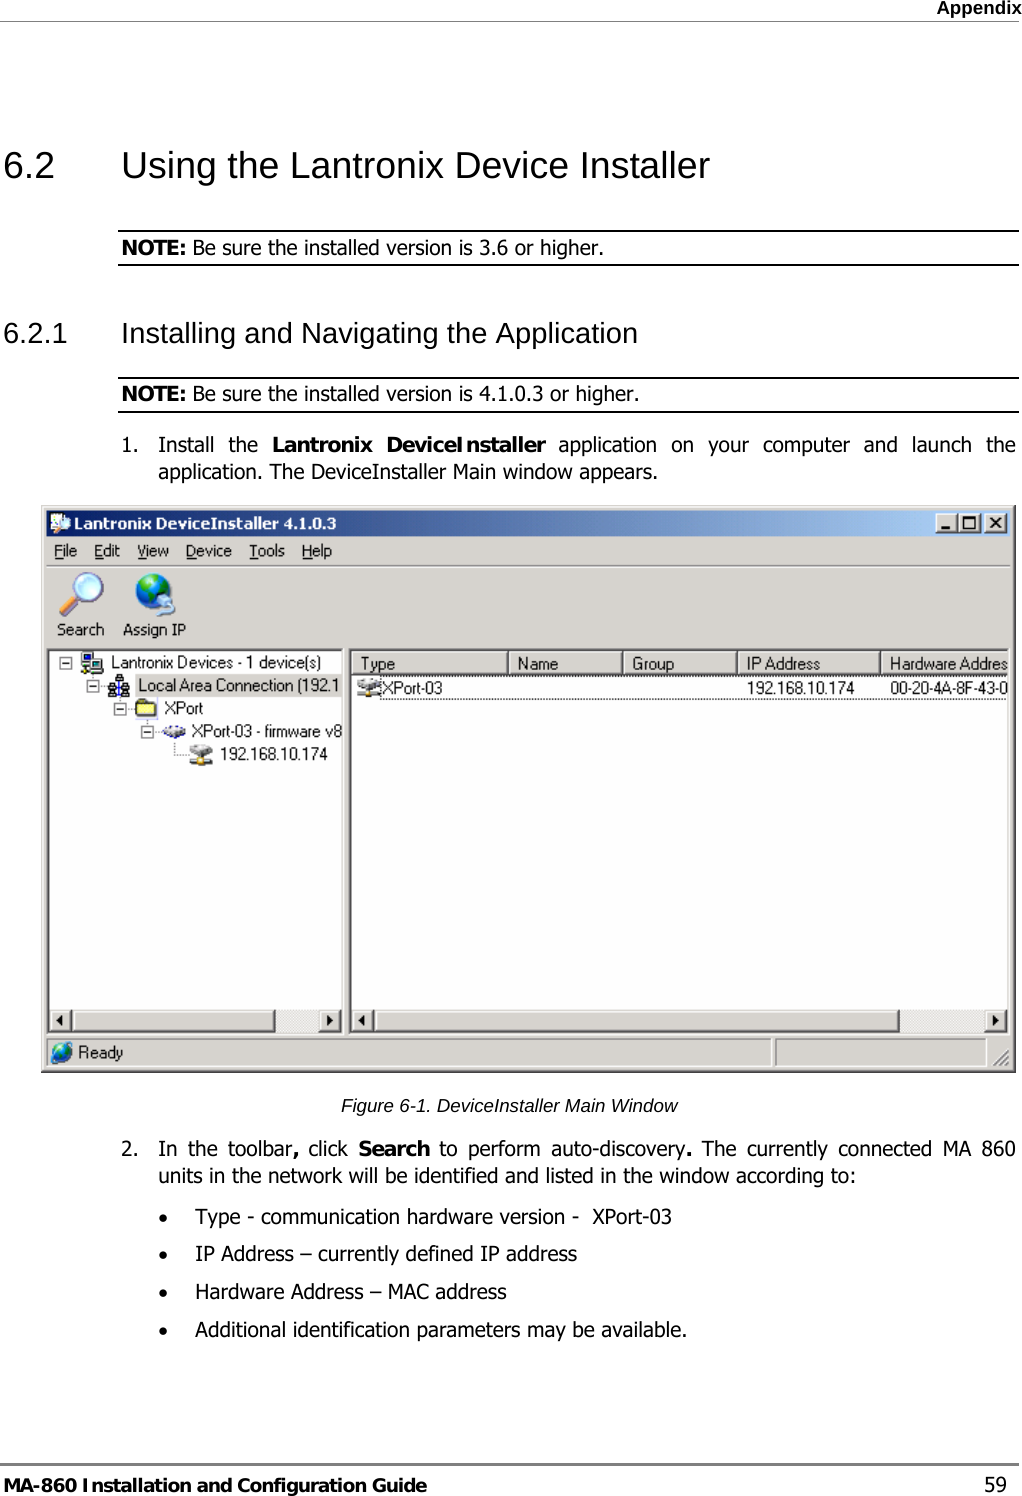  Appendix  6.2  Using the Lantronix Device Installer NOTE: Be sure the installed version is 3.6 or higher. 6.2.1  Installing and Navigating the Application NOTE: Be sure the installed version is 4.1.0.3 or higher. 1. Install the Lantronix DeviceInstaller application on your computer and launch the application. The DeviceInstaller Main window appears.  Figure  6-1. DeviceInstaller Main Window 2.  In the toolbar, click  Search  to perform auto-discovery. The currently connected MA 860 units in the network will be identified and listed in the window according to: • Type - communication hardware version -  XPort-03 • IP Address – currently defined IP address • Hardware Address – MAC address  • Additional identification parameters may be available. MA-860 Installation and Configuration Guide    59 